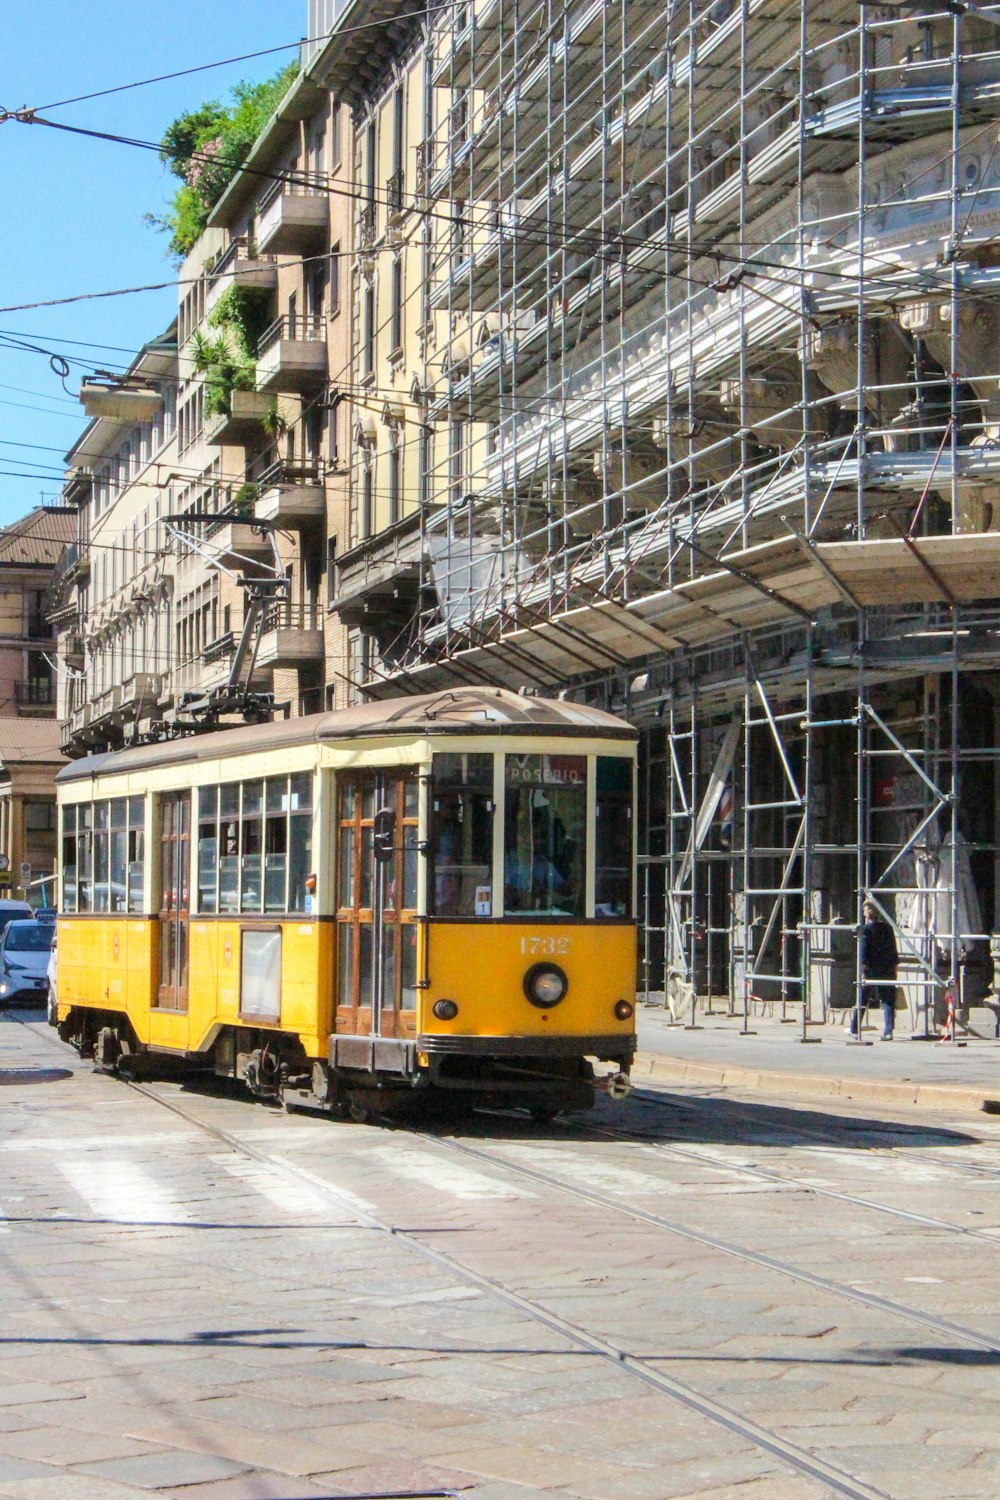 yellow and white tram on road near building during daytime